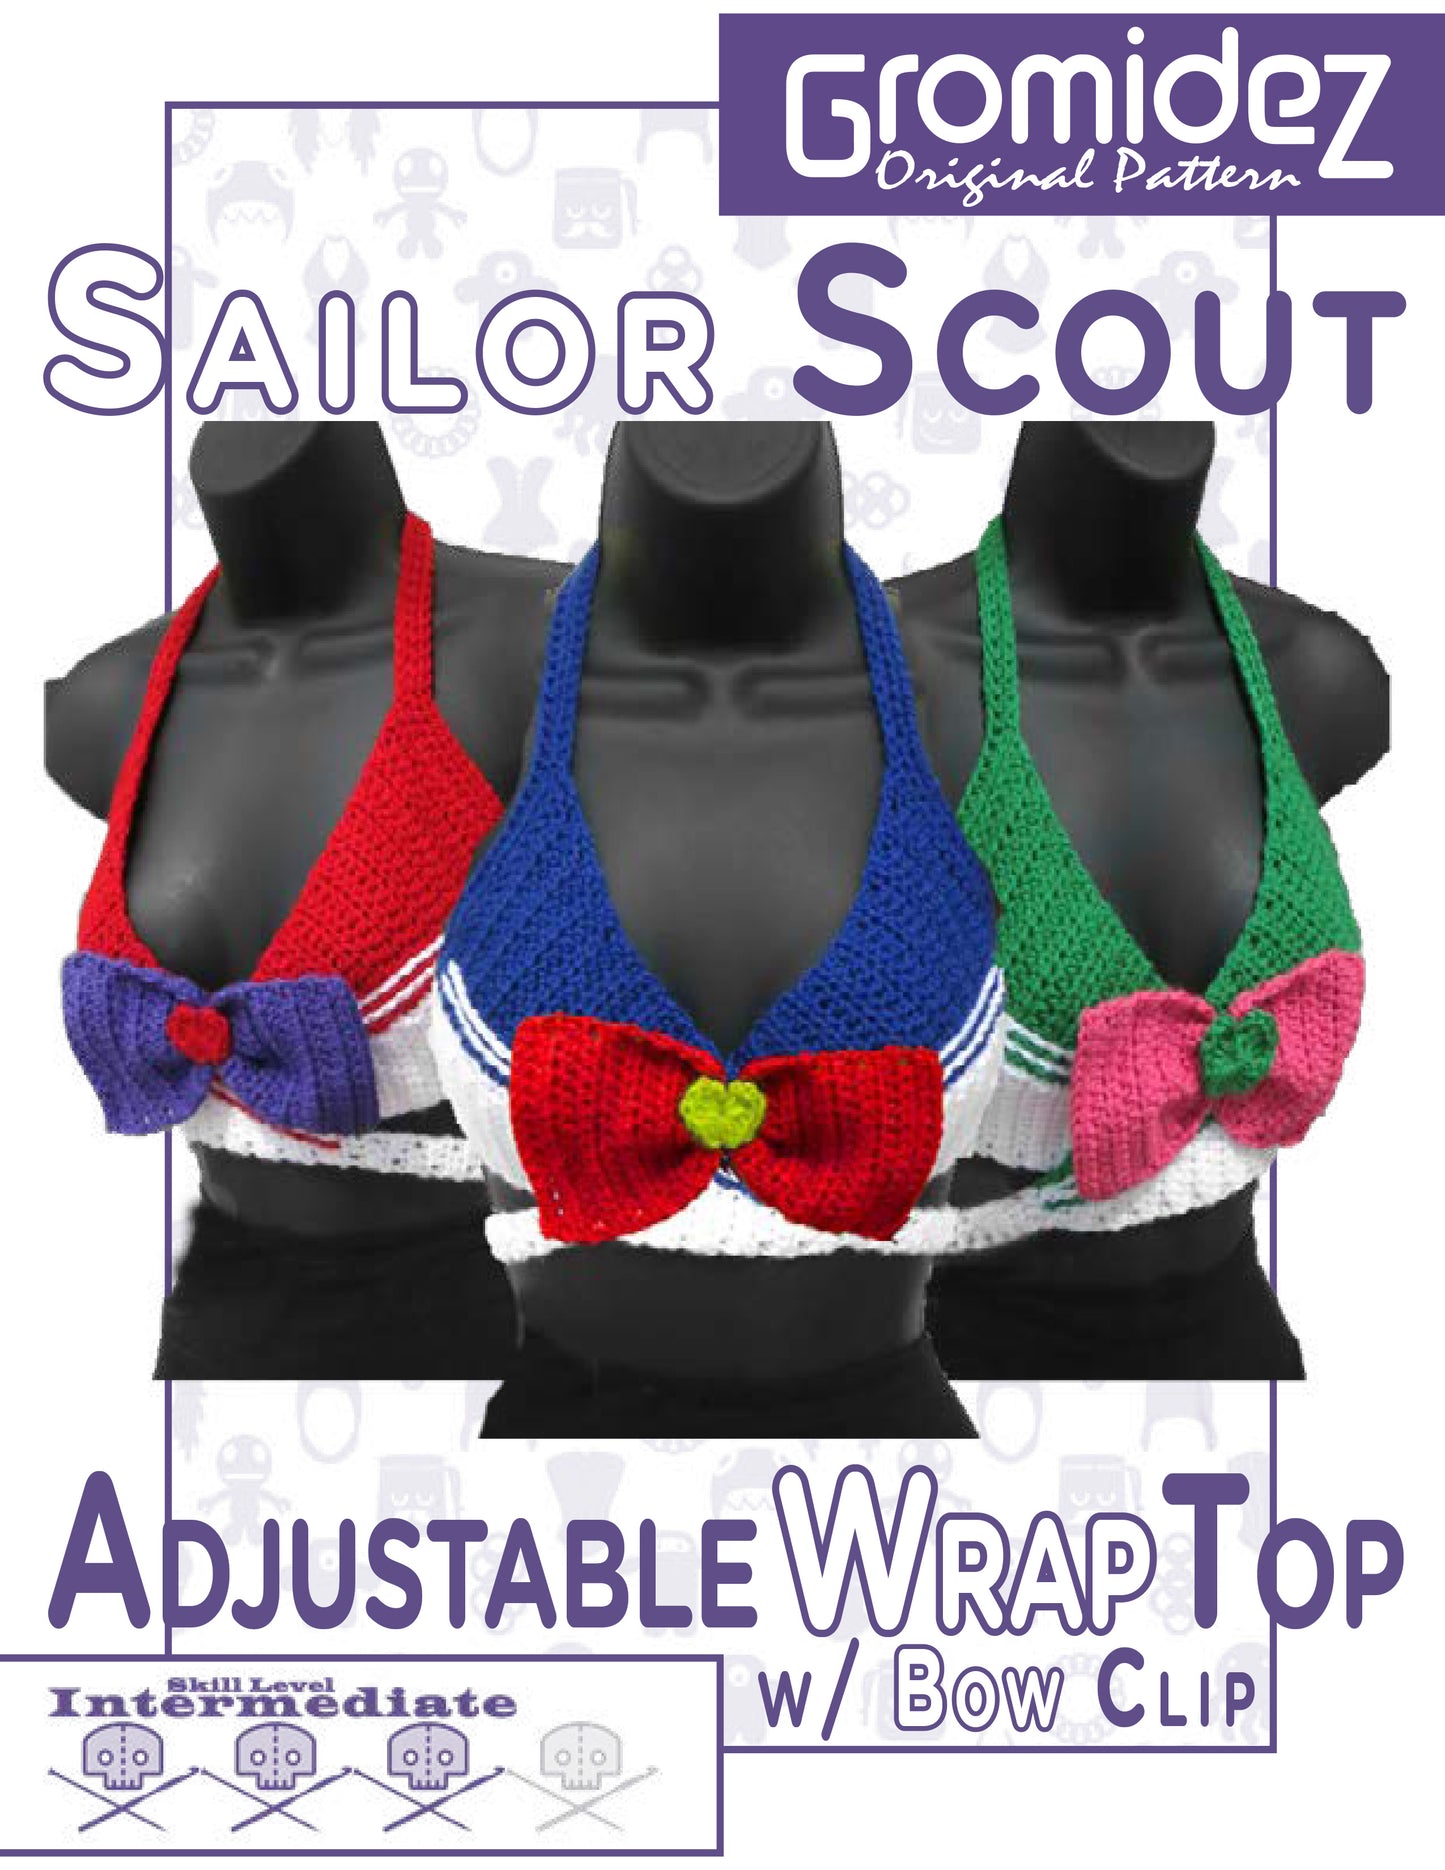 Sailor Scout Adjustable Wrap Top and Bow Clip Crochet Pattern- US/UK Terms